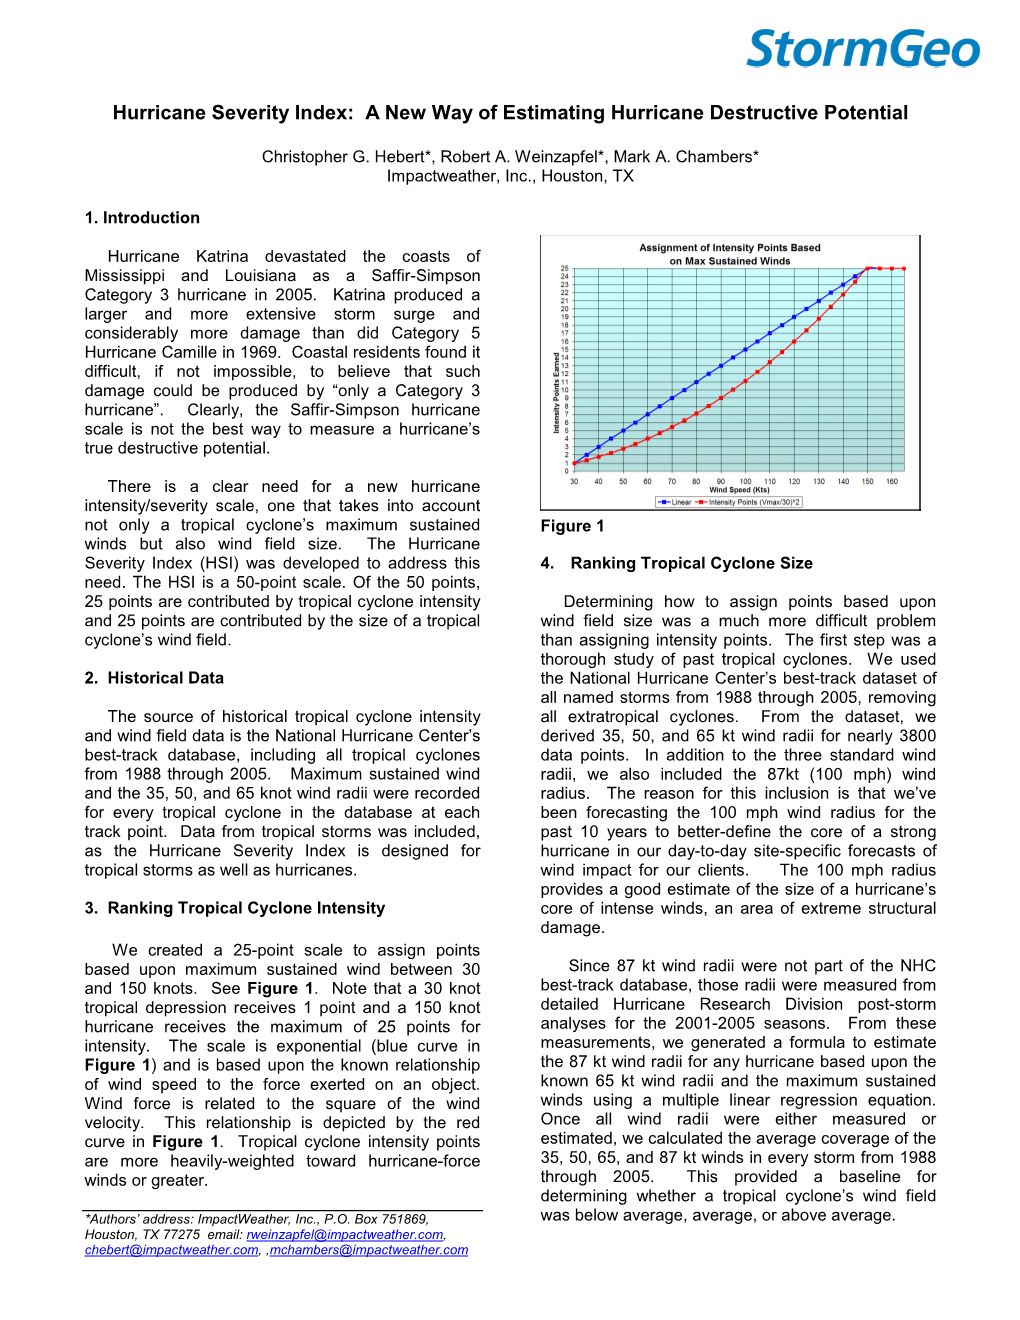 Hurricane Severity Index Abstract